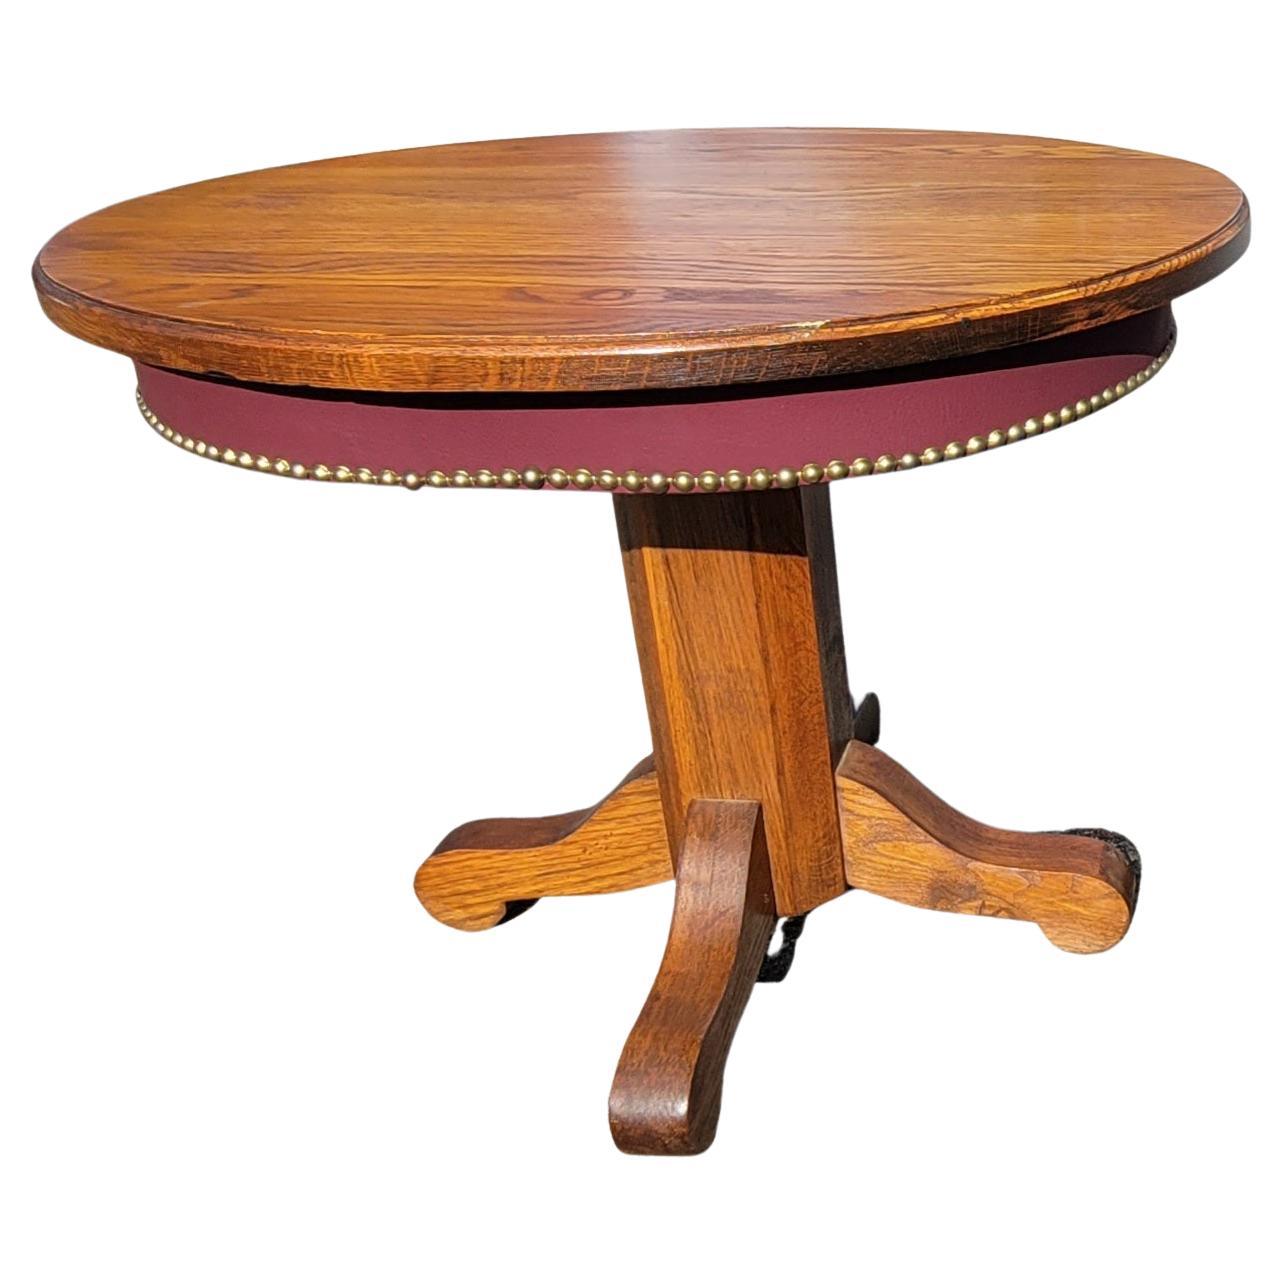 American Classical American Mission Oak Pedestal Oval Side Tables W Leatherette Nail Trim Apron For Sale